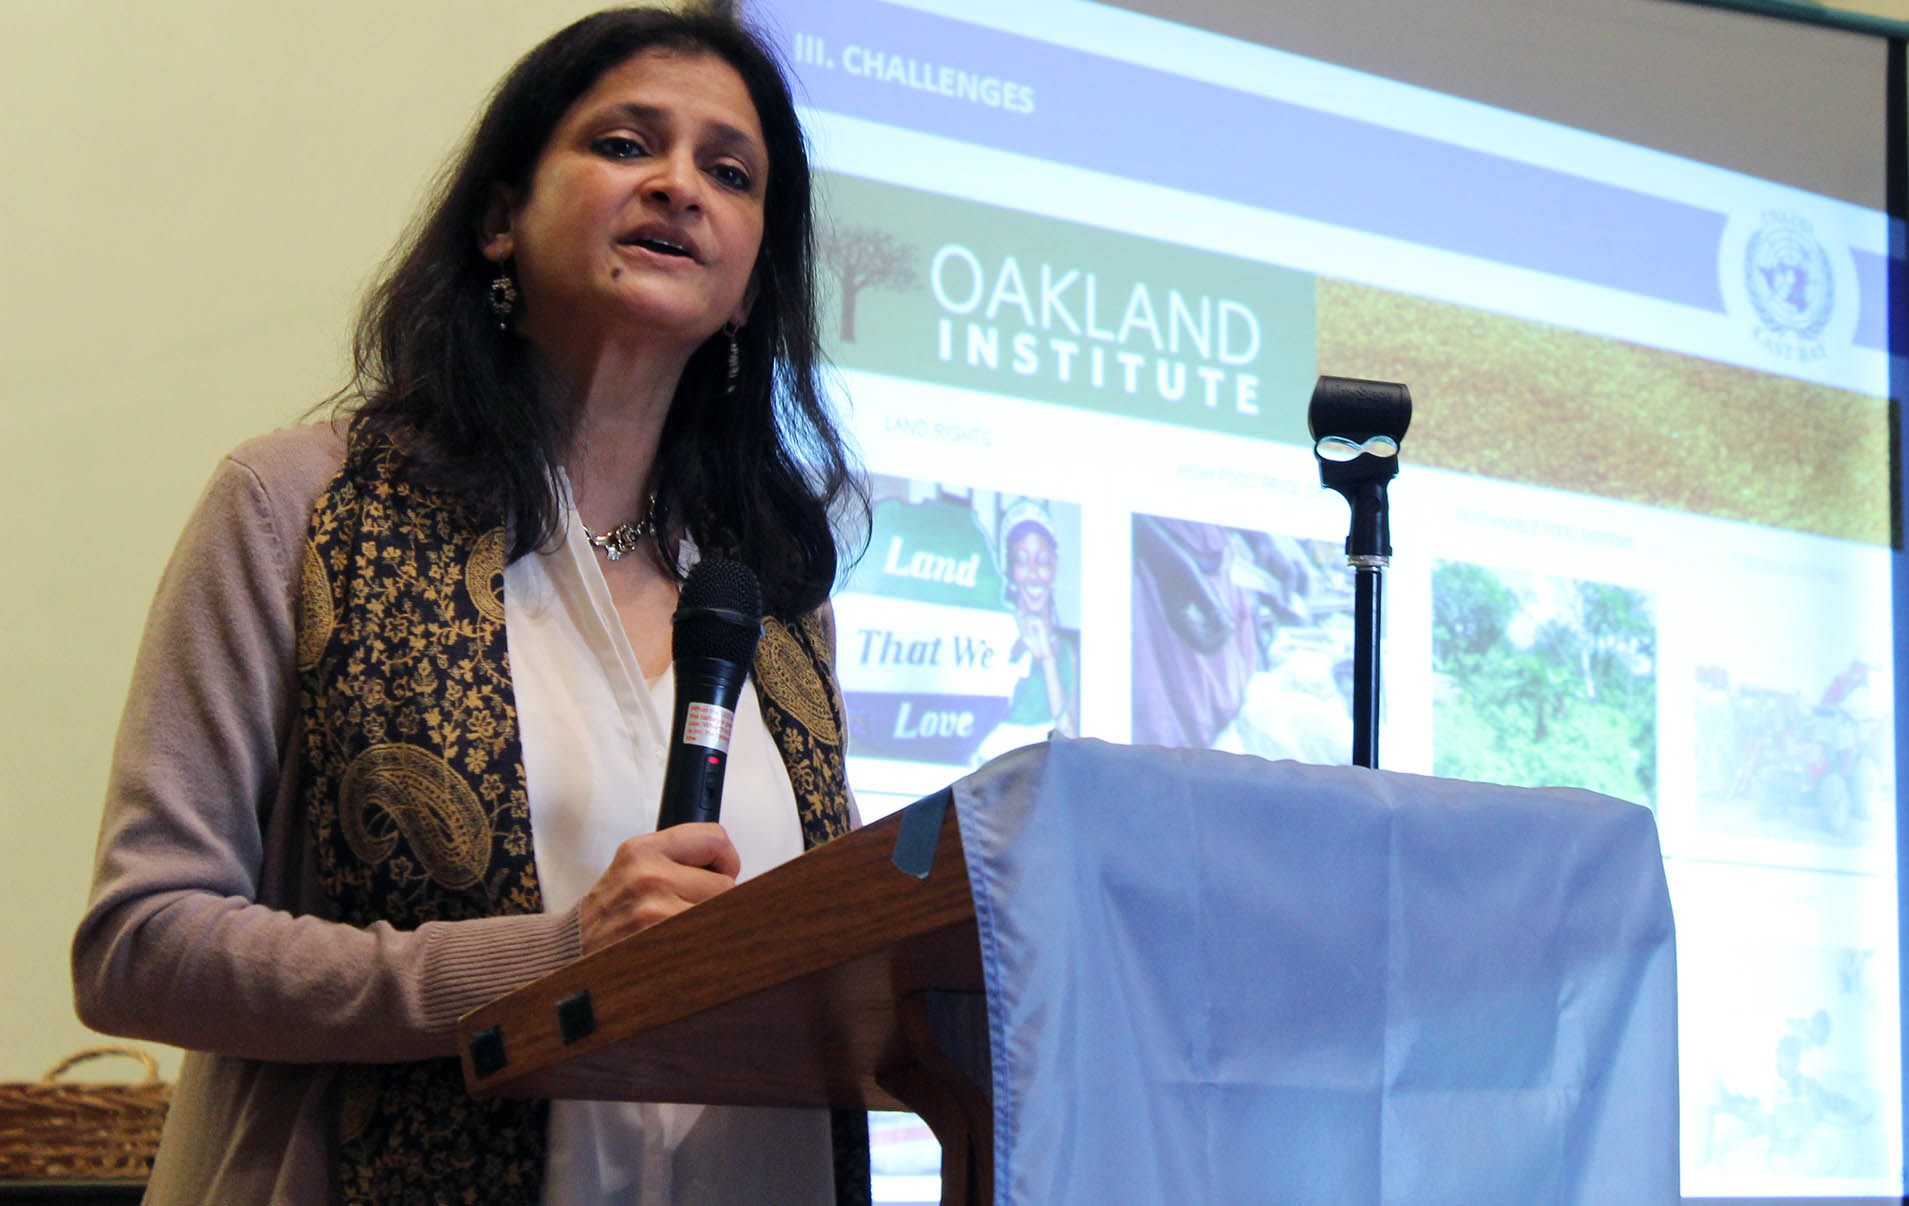 Anuradha Mittal of the Oakland Institute speaks at the United Nations Association forum in Berkeley on food as a human right.